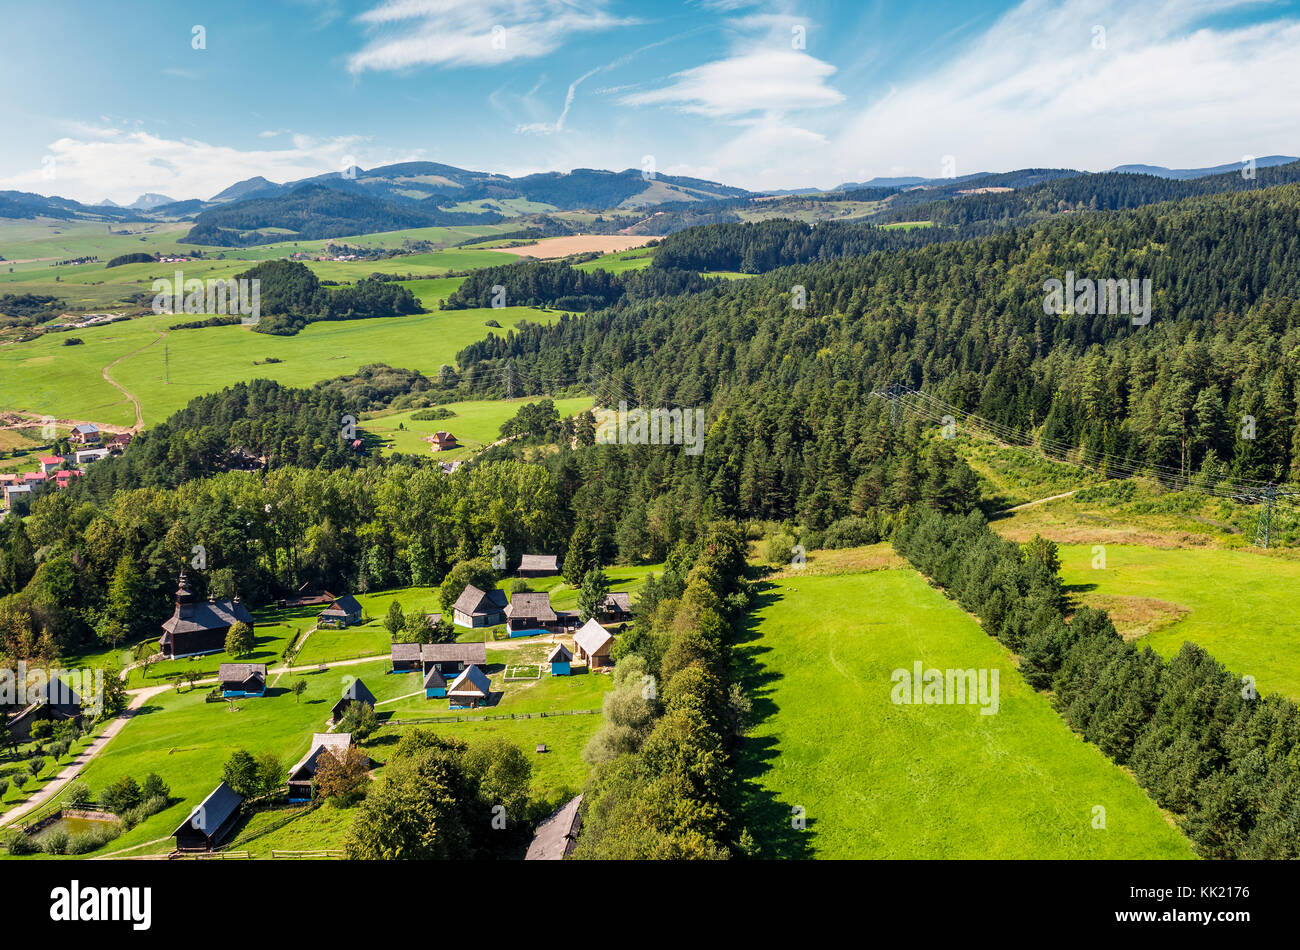 Slovakian town Stara Lubovna on forested hillside. beautiful rural scenery in mountainous area viewed from above on a summer day. Stock Photo